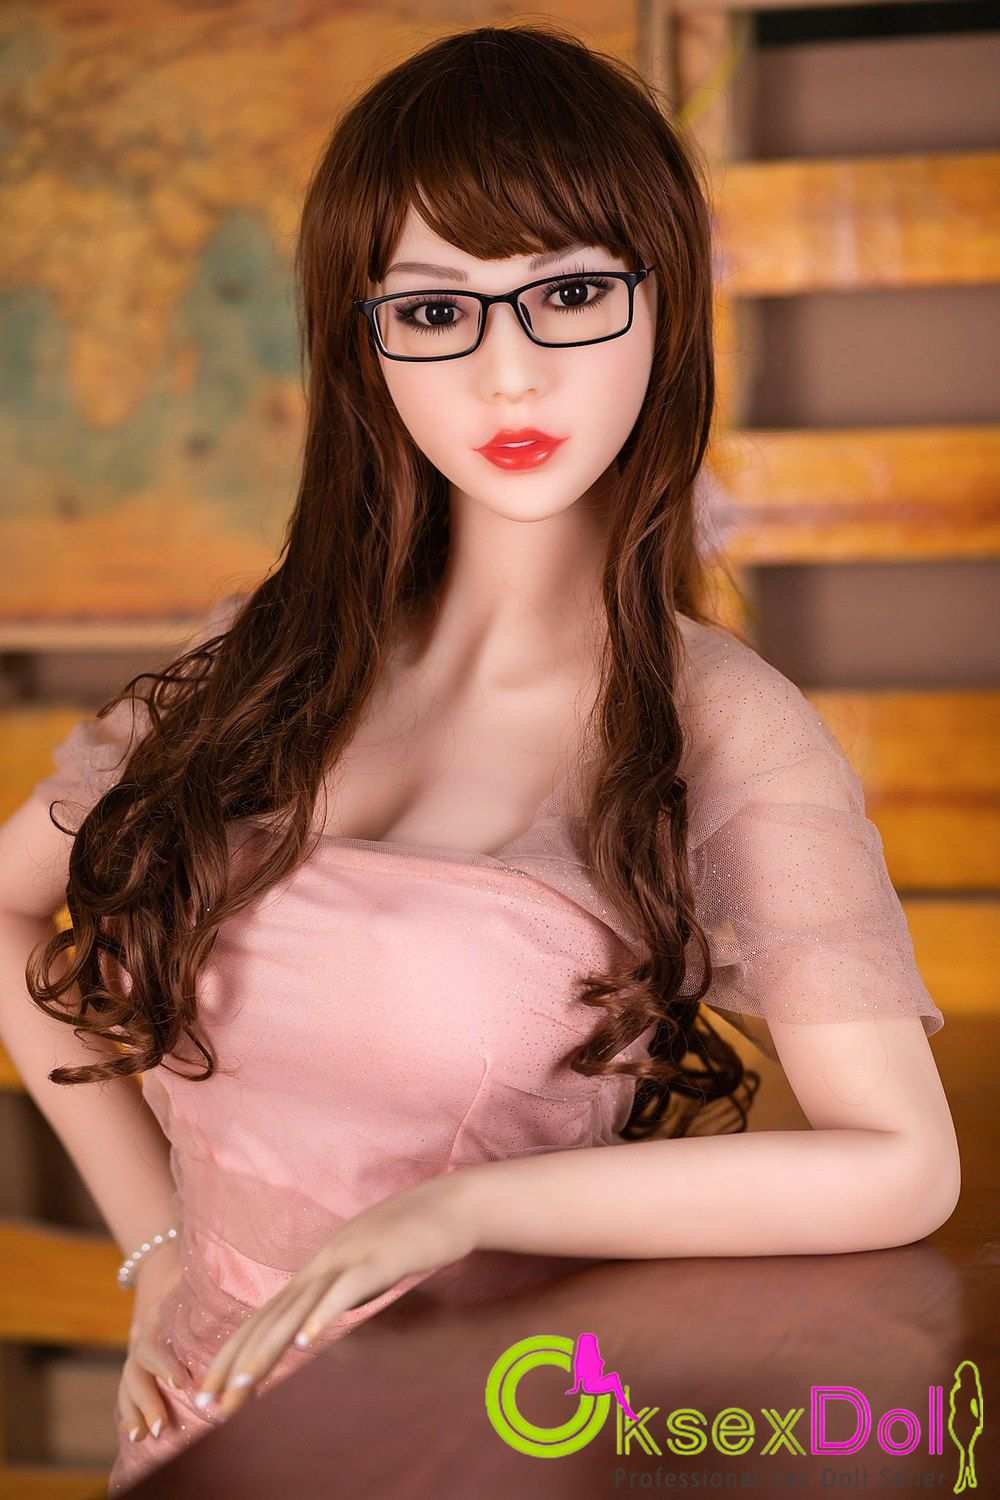 Realistic Sex Doll Gallery of Mikka